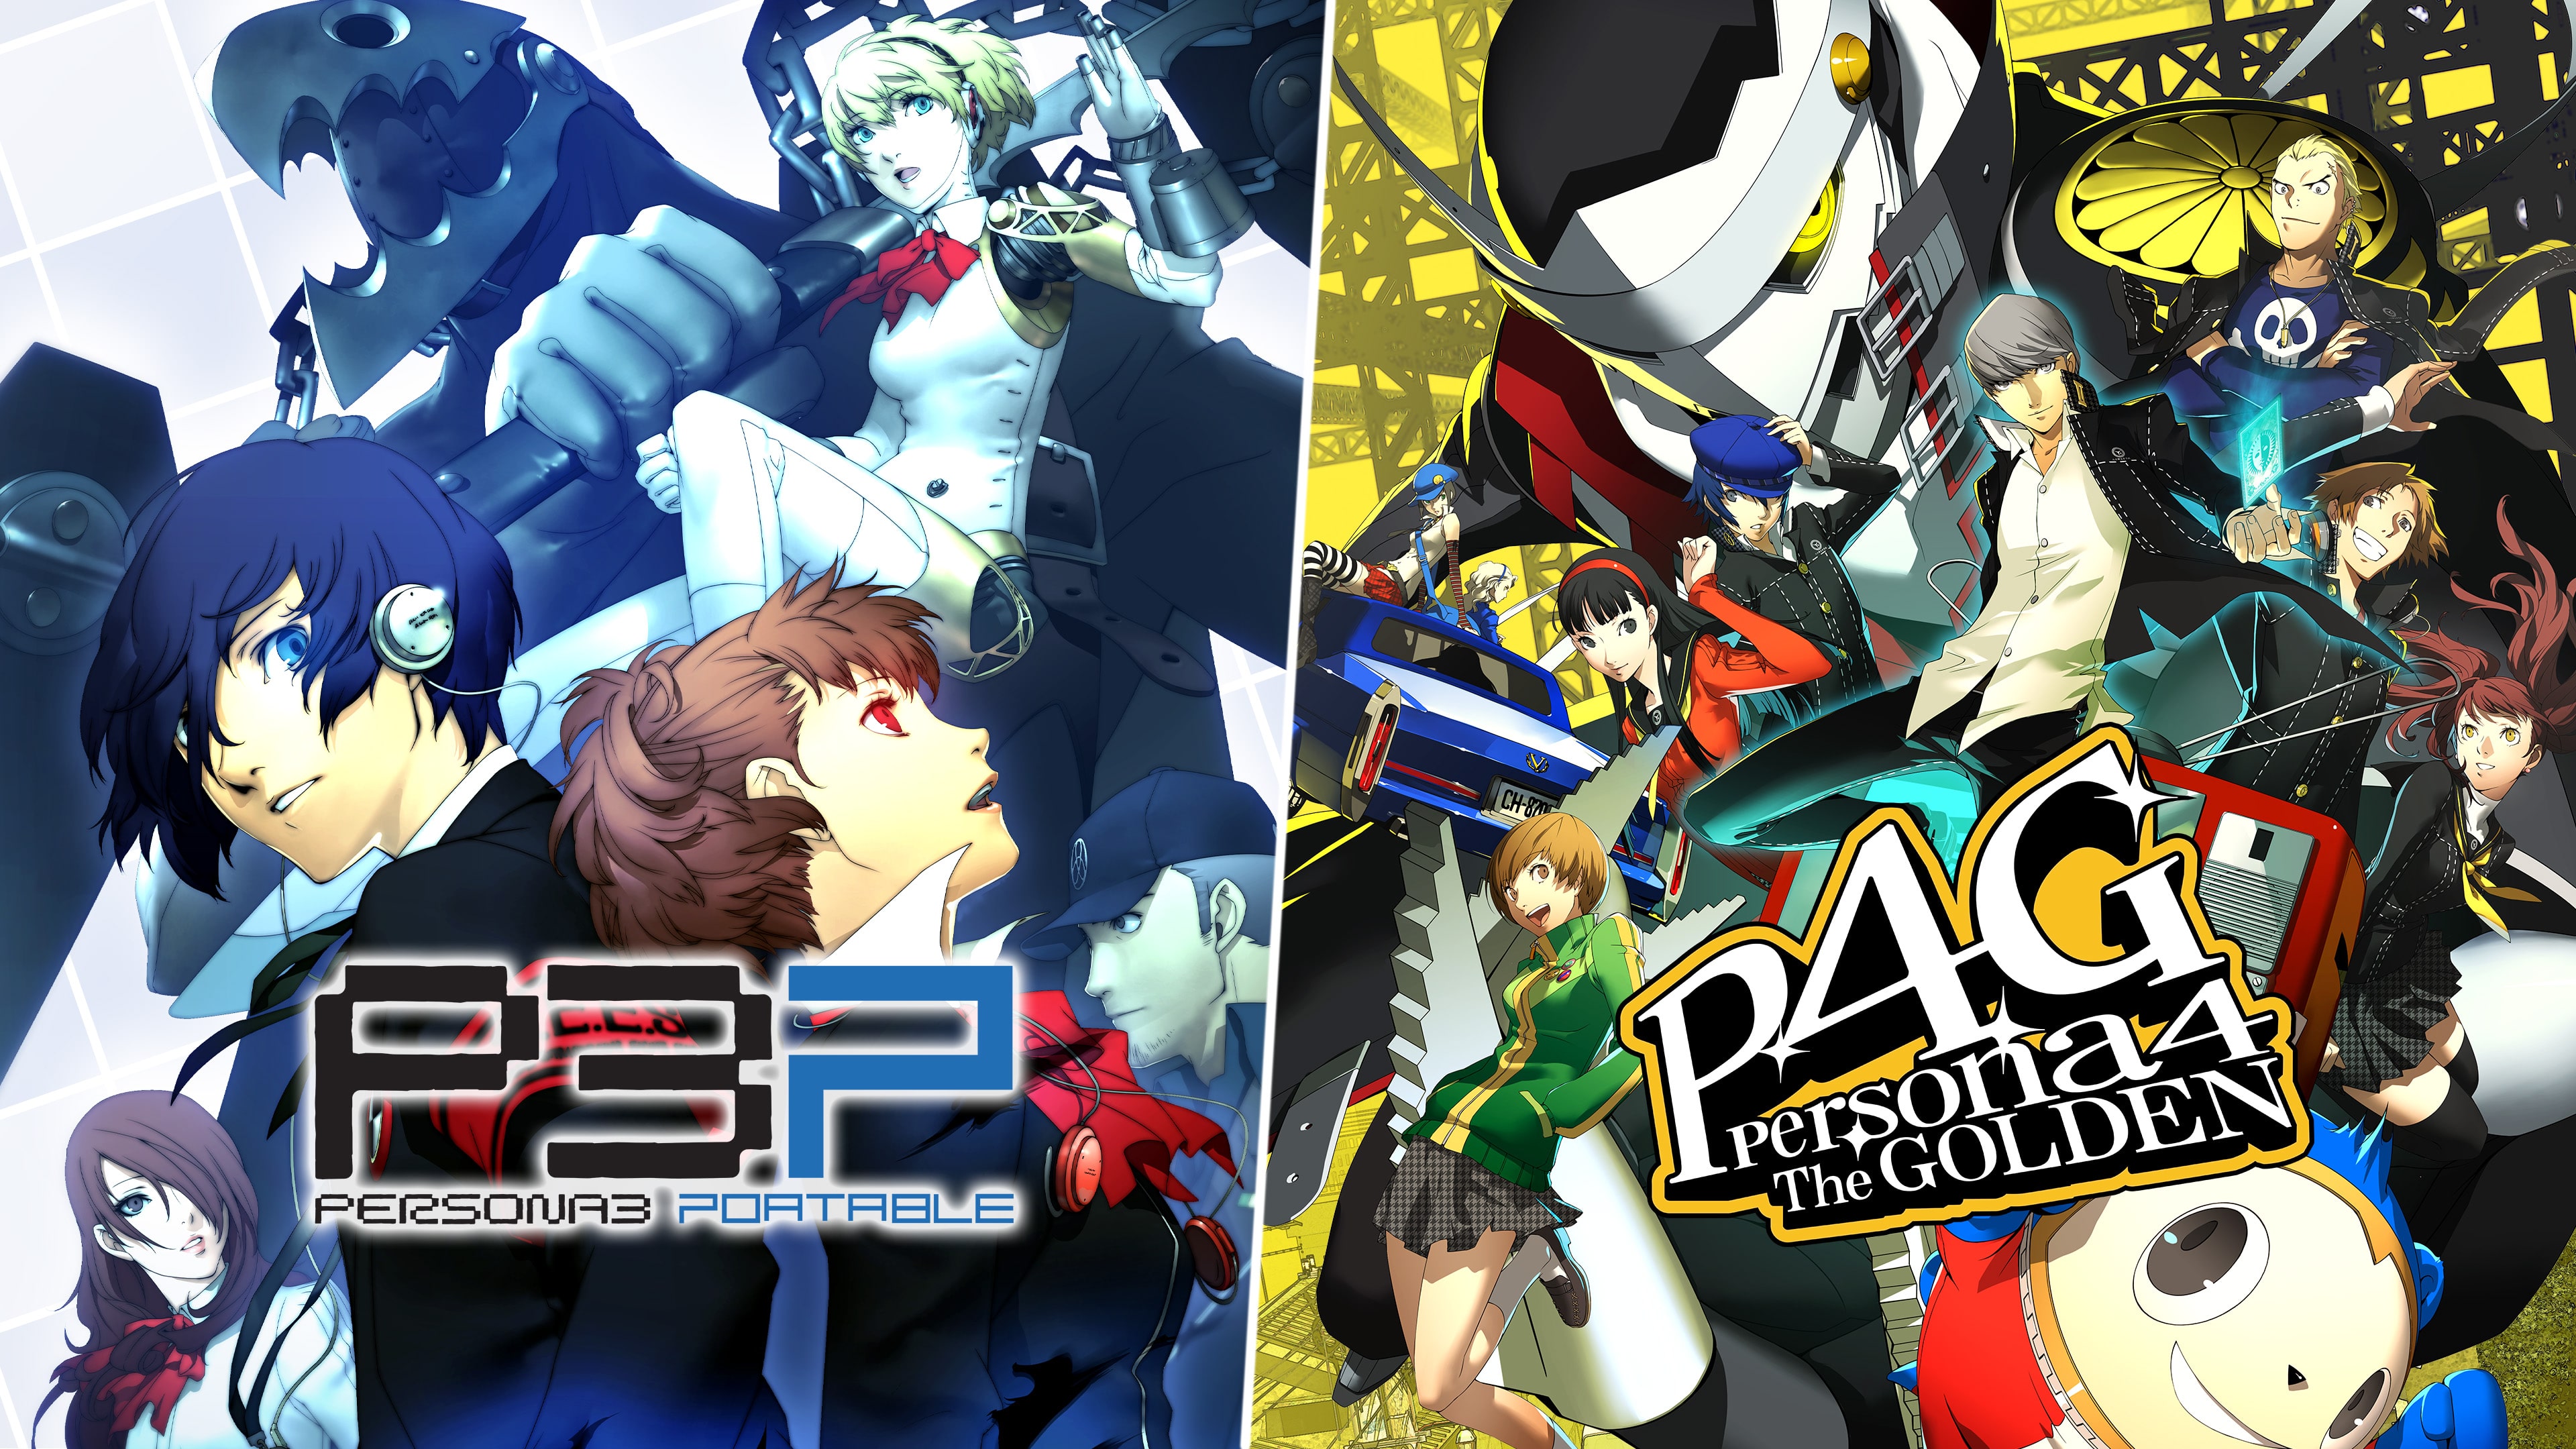 Persona 3 Portable & Persona 4 The Golden Bundle (Simplified Chinese, English, Korean, Japanese, Traditional Chinese)